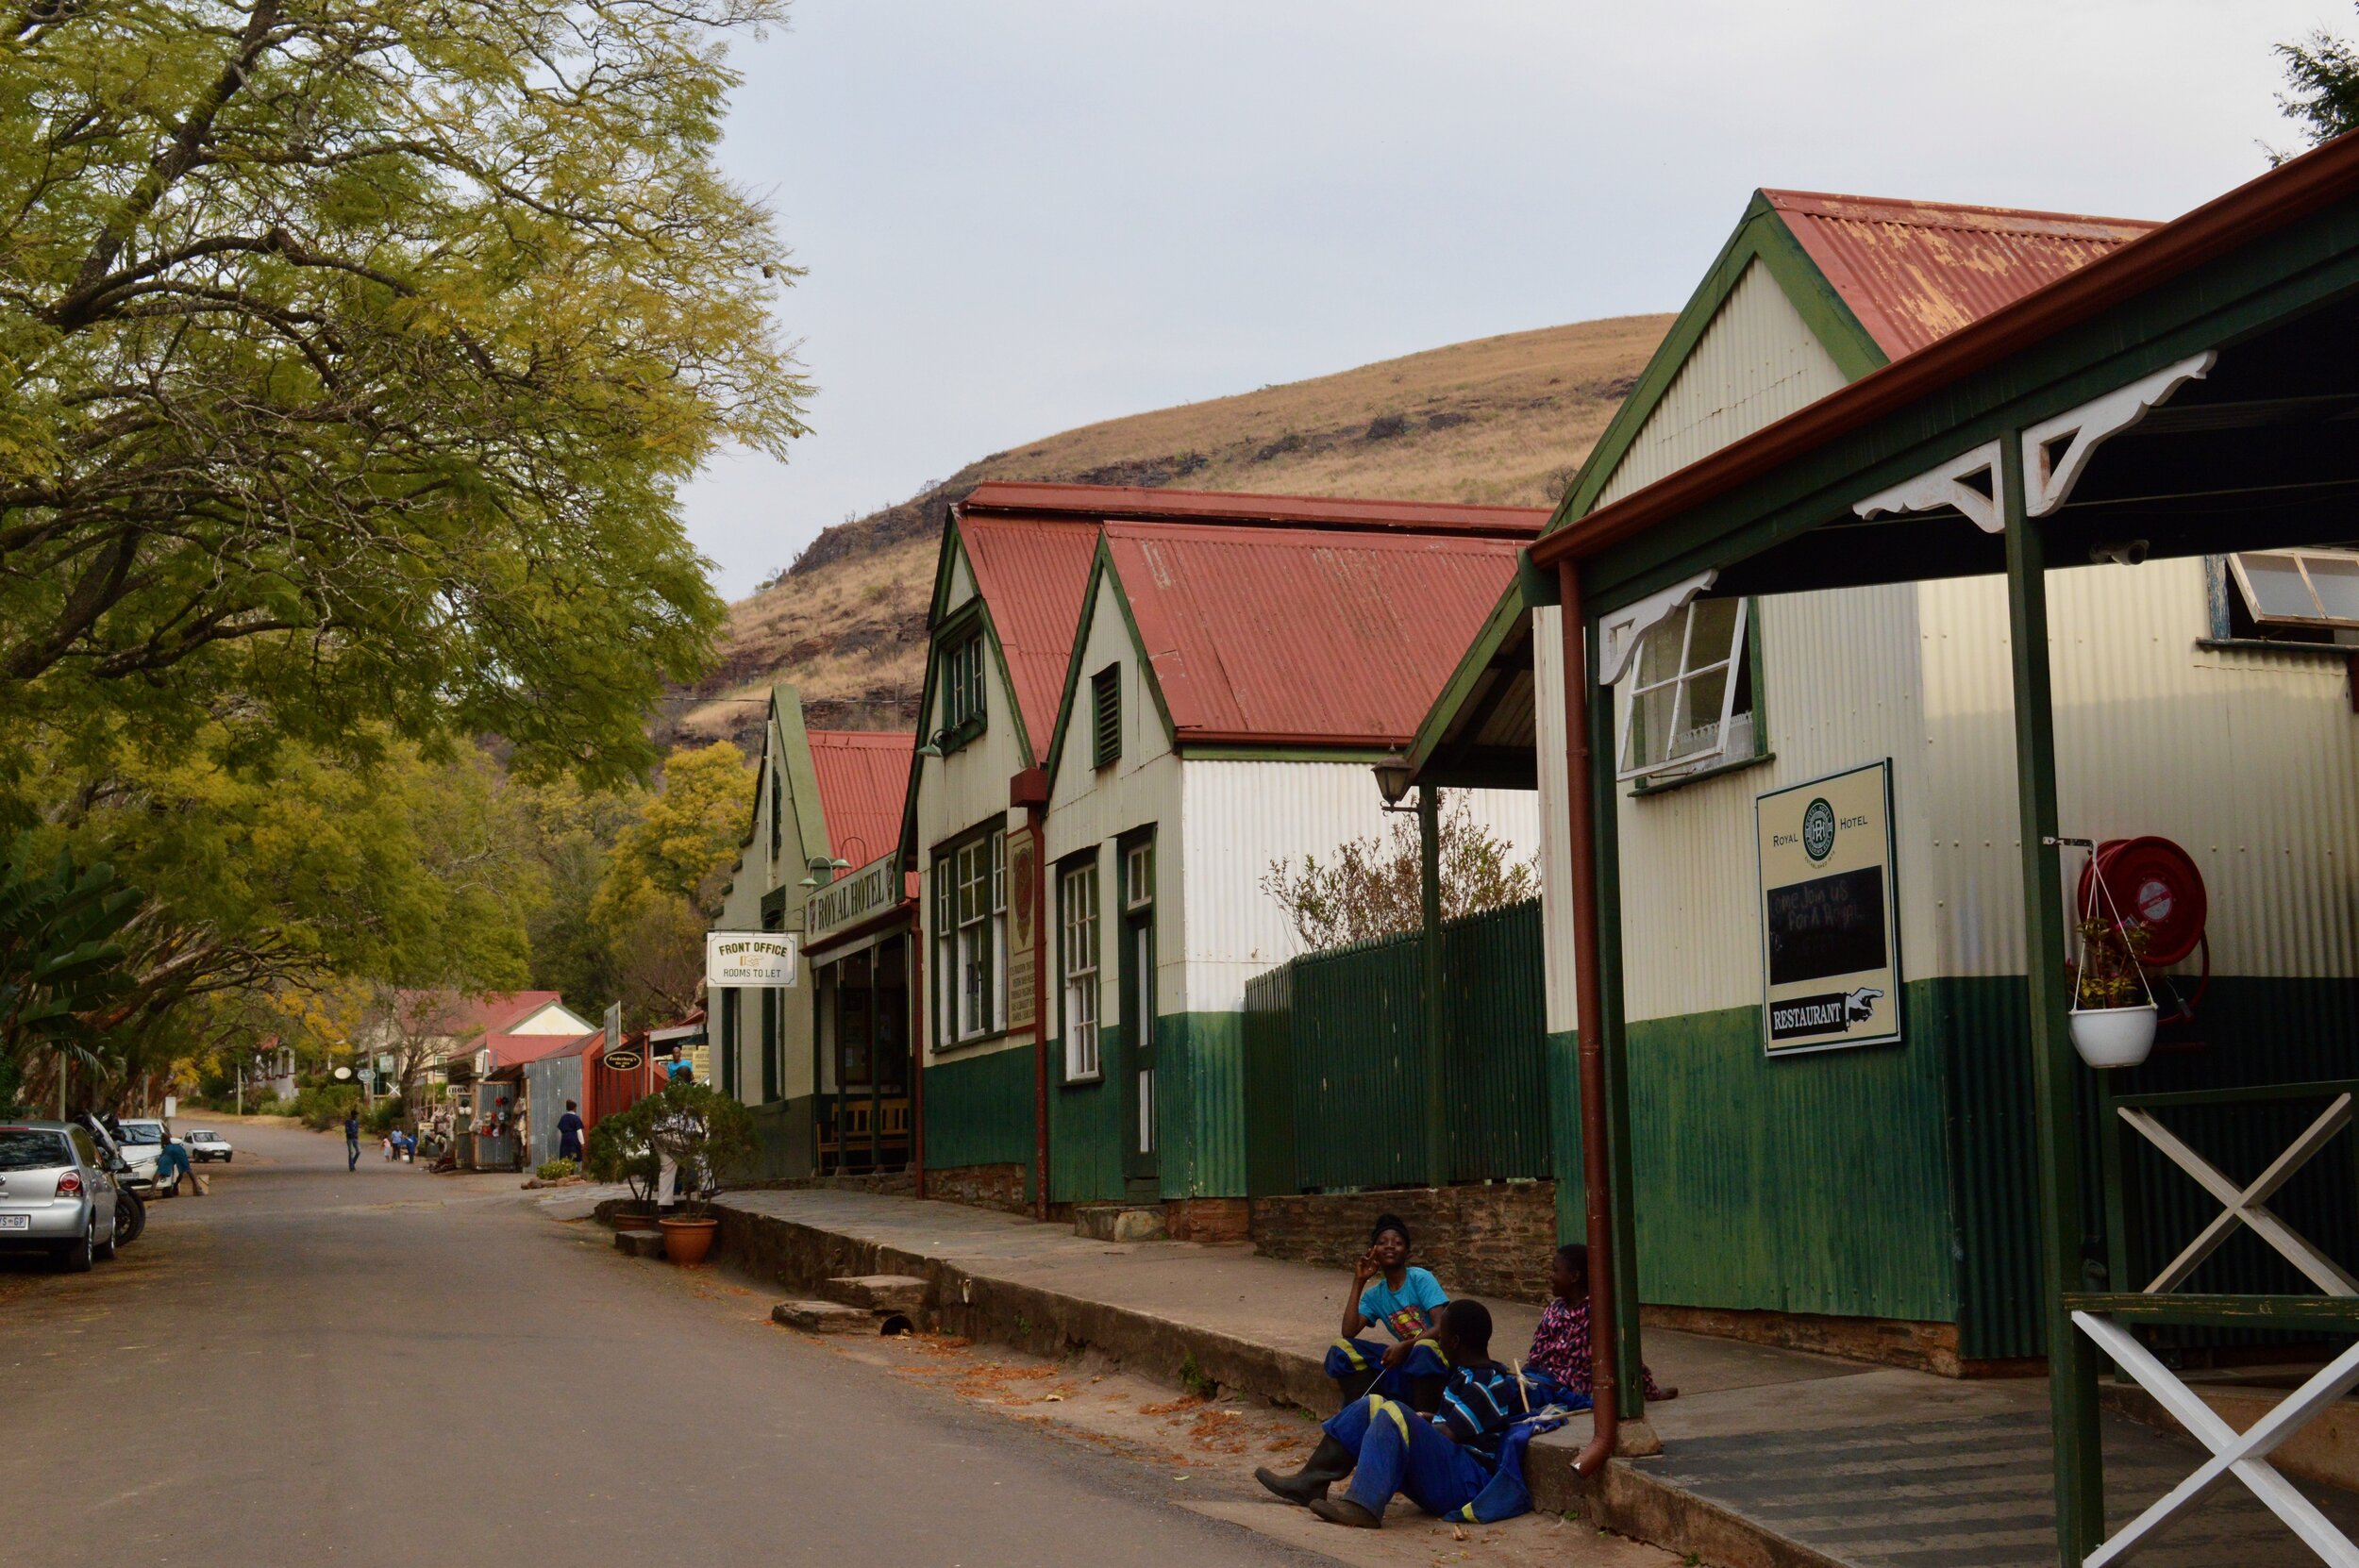  Main Street, Pilgrim’s Rest, South Africa. A few years back, this site was taken off the list of South Africa’s tentative UNESCO nominations, further endangering its unique and fragile vernacular architecture.&nbsp; 